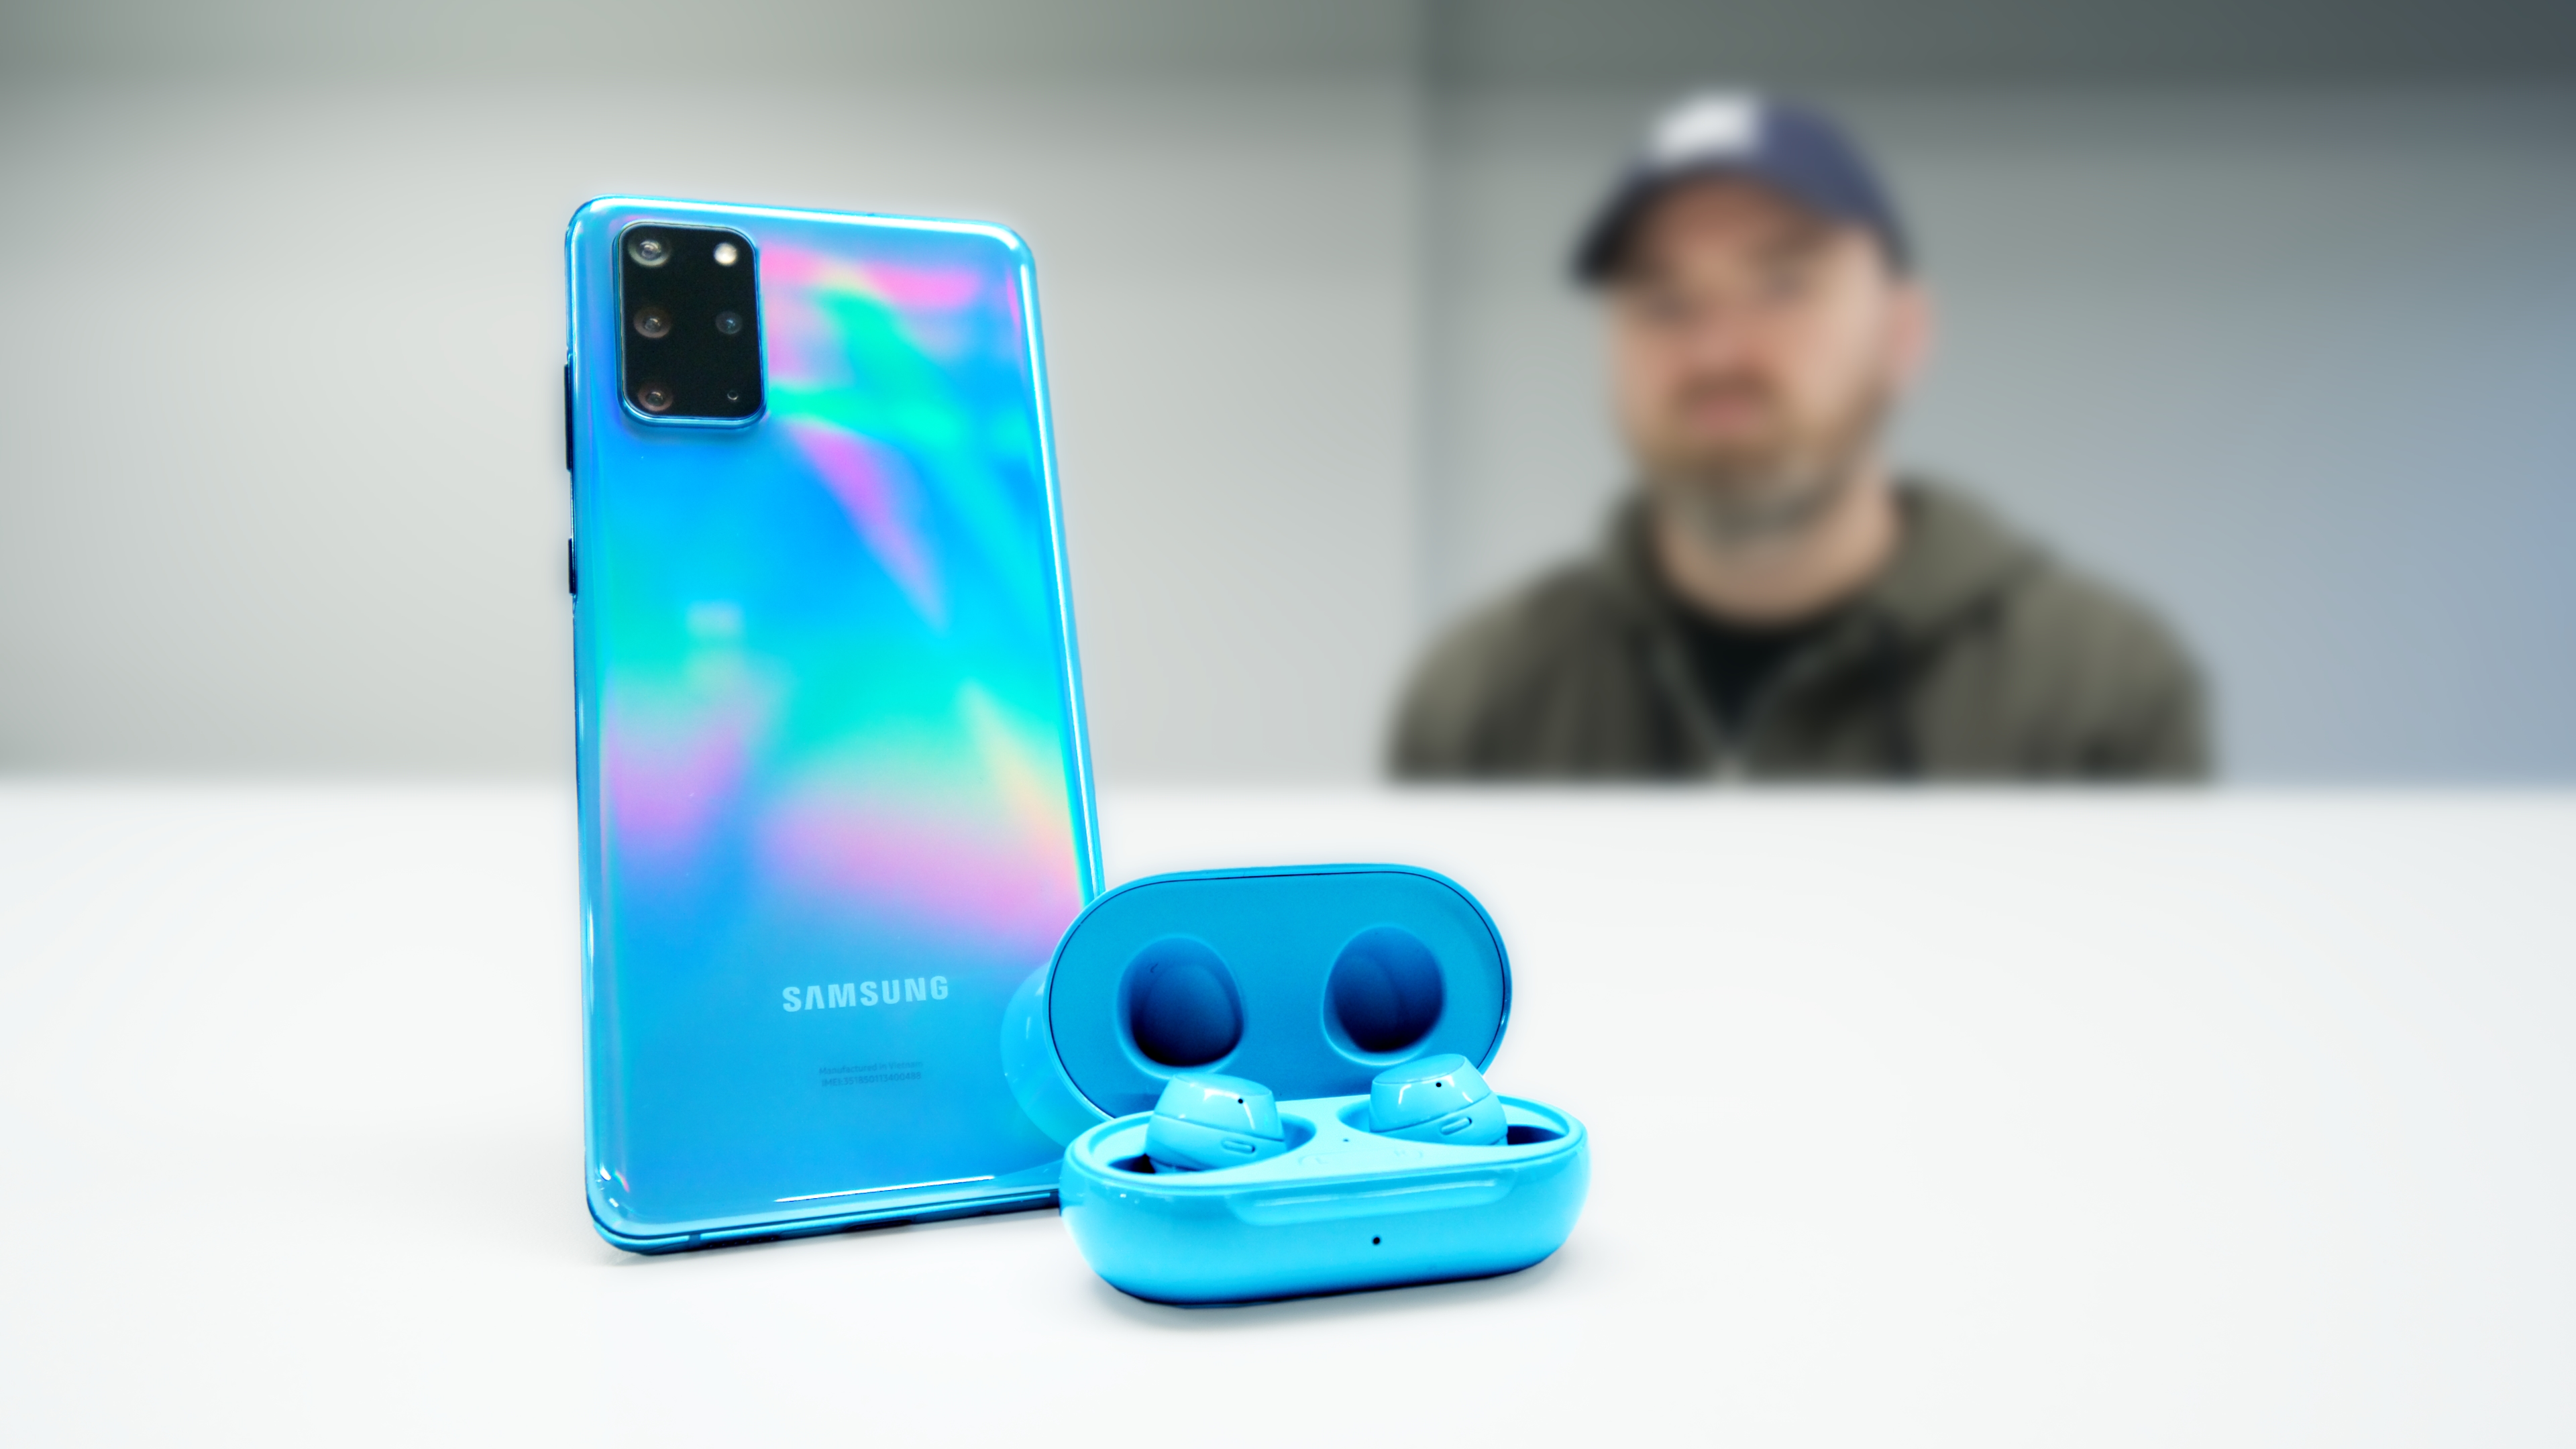 Therapy on Twitter: "Samsung Galaxy (vs AirPods, Galaxy Buds) - https://t.co/XtxIN7EFvF https://t.co/XqM0doN0Jr" / Twitter